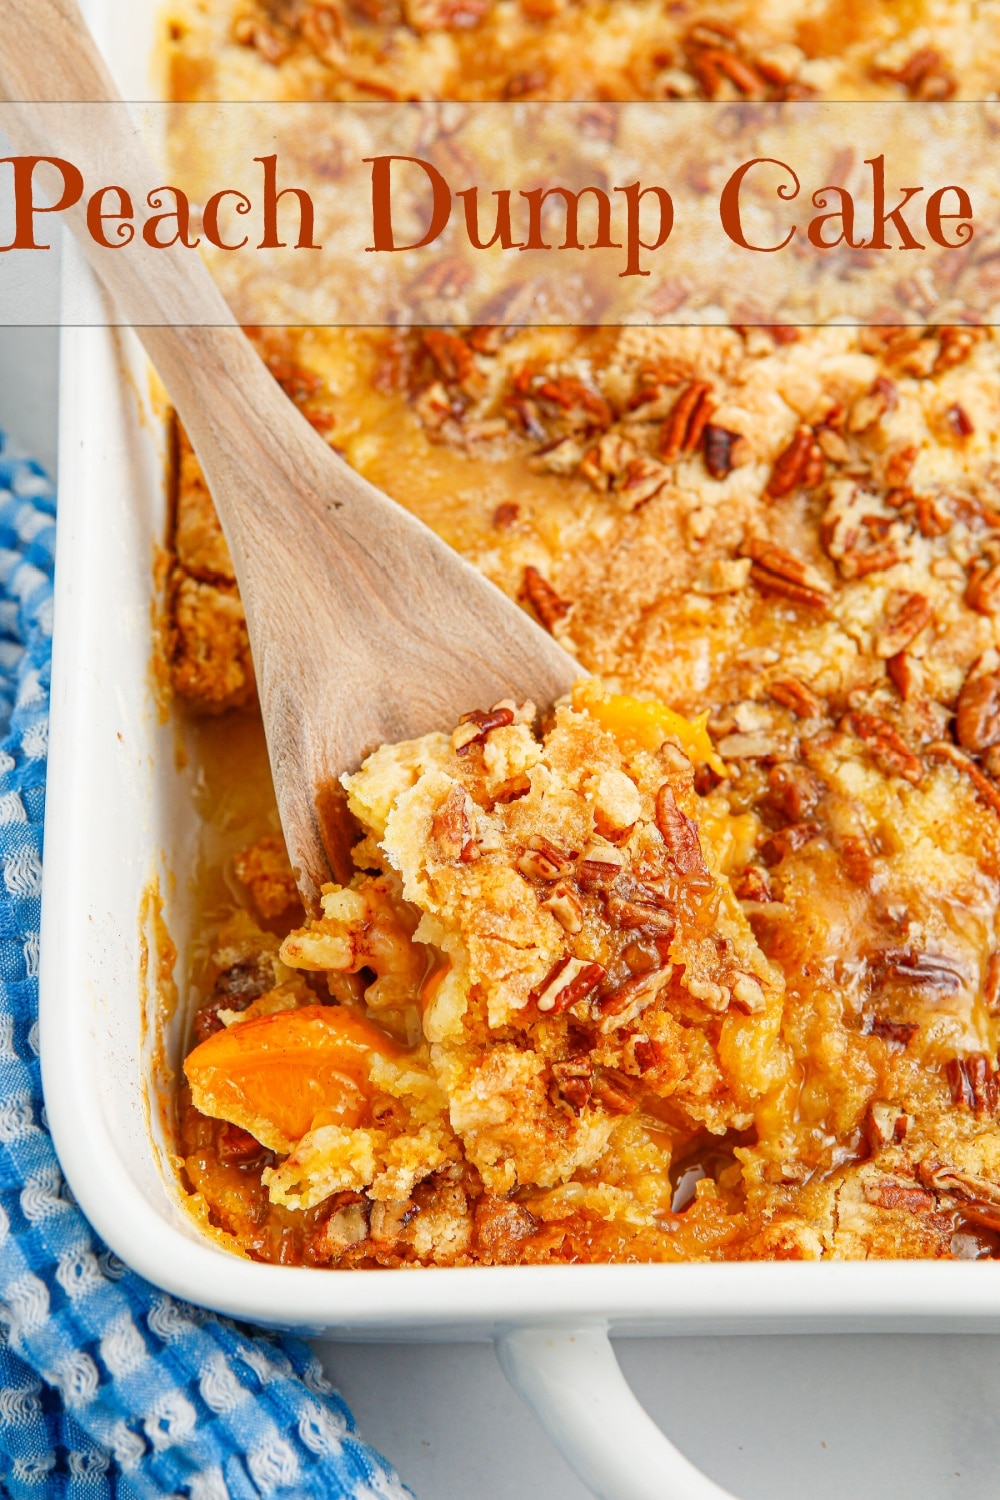 Dessert doesn't get much easier than this Peach Dump Cake recipe. True to its name, you just dump (layer) everything in a baking dish and place it in the oven. In less than an hour, you'll have an effortless dump cake dessert that will be devoured even faster than it was prepared. It's the best peach cake recipe. via @cmpollak1